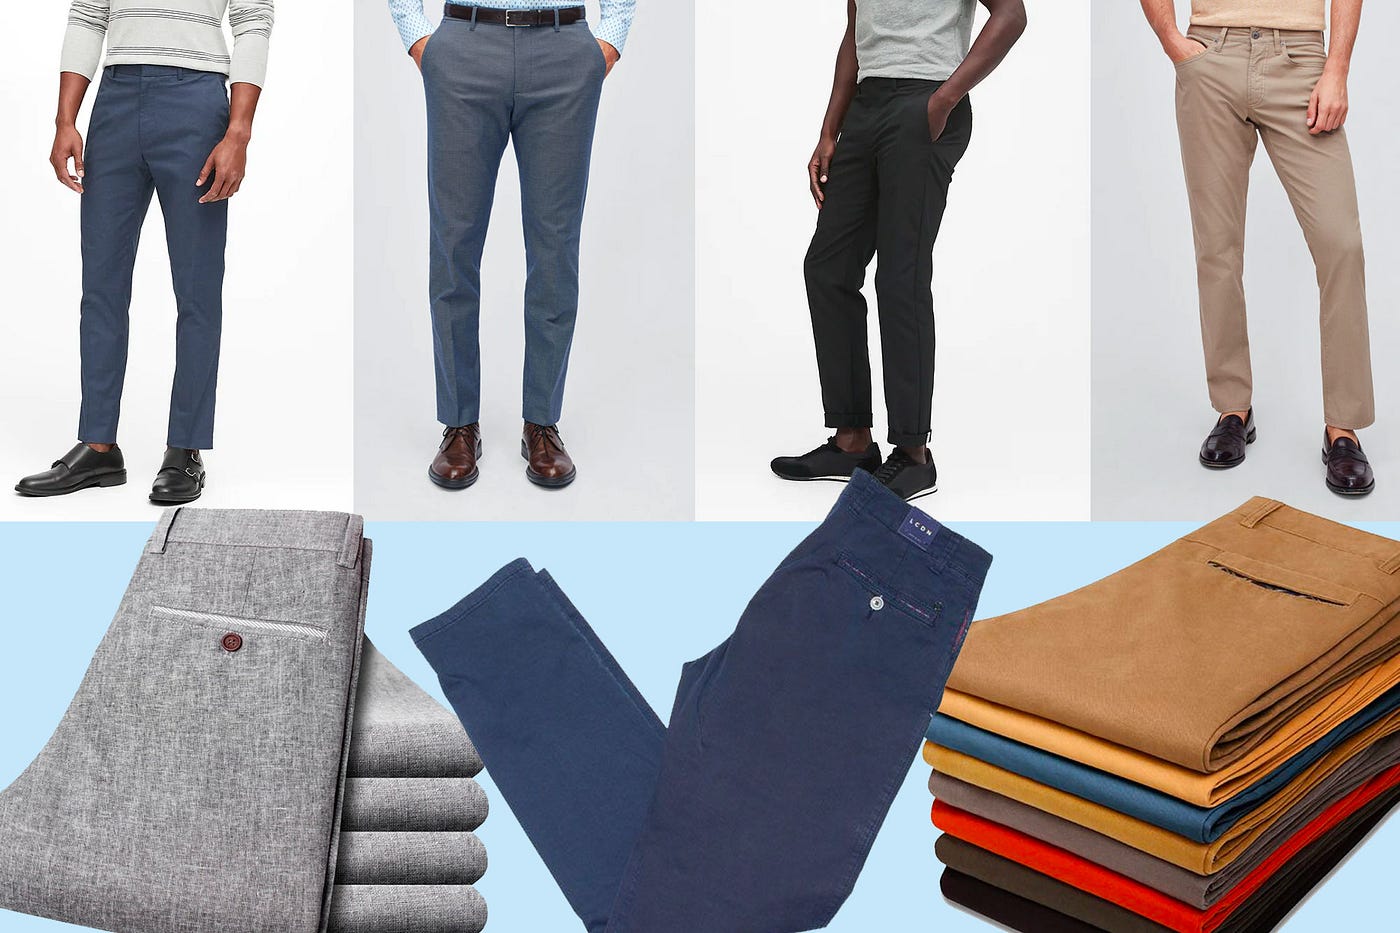 The 14 Best Men's Pants Colors That Make Guys Look Great, by Dave Bowden, IrreverentGent.com